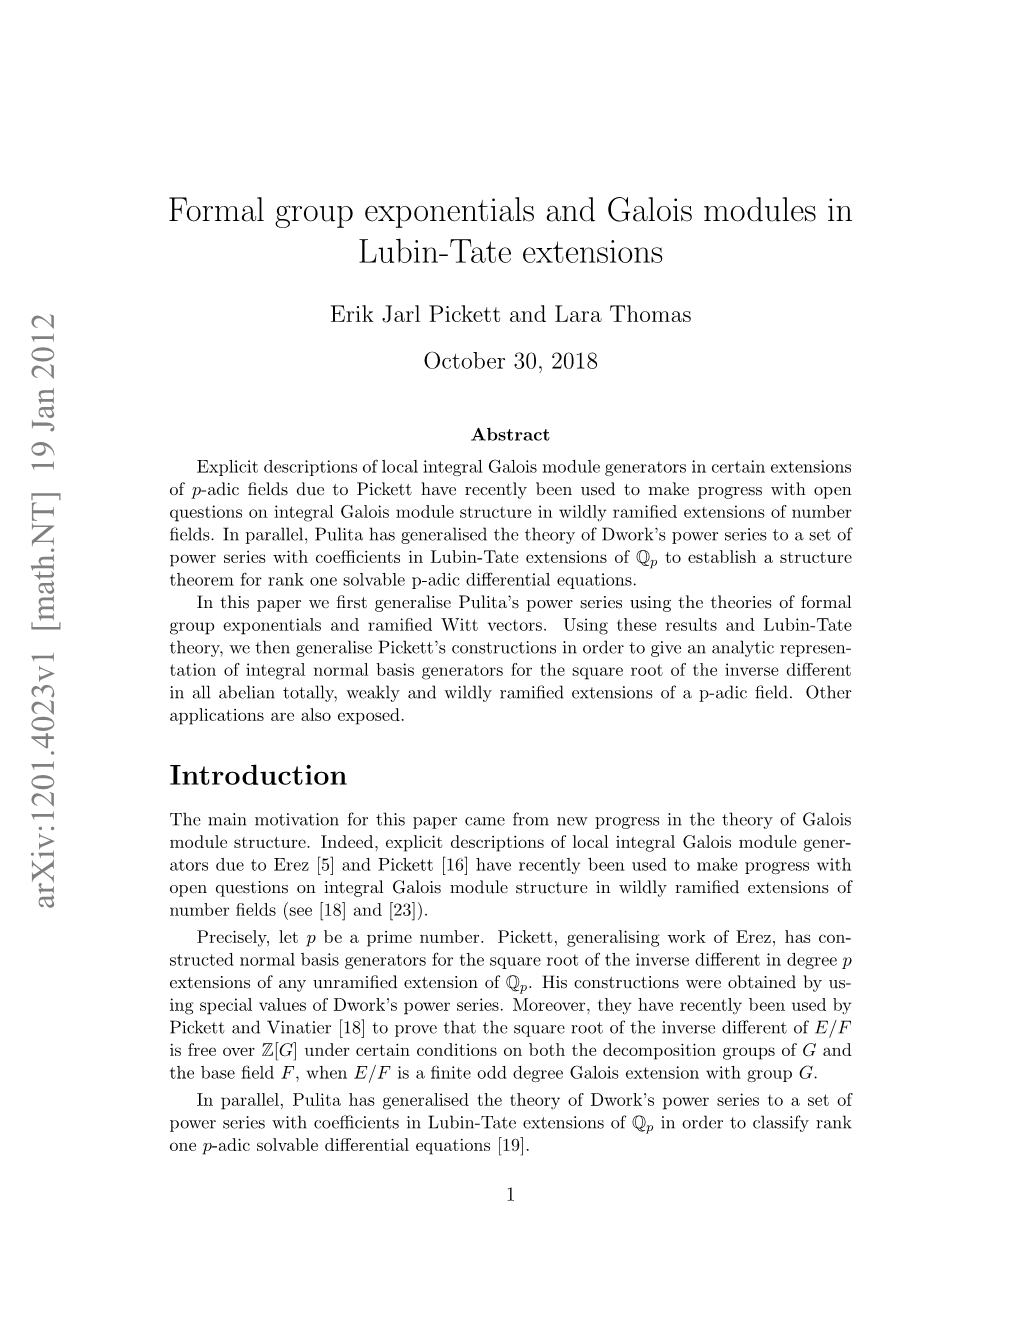 Formal Group Exponentials and Galois Modules in Lubin-Tate Extensions